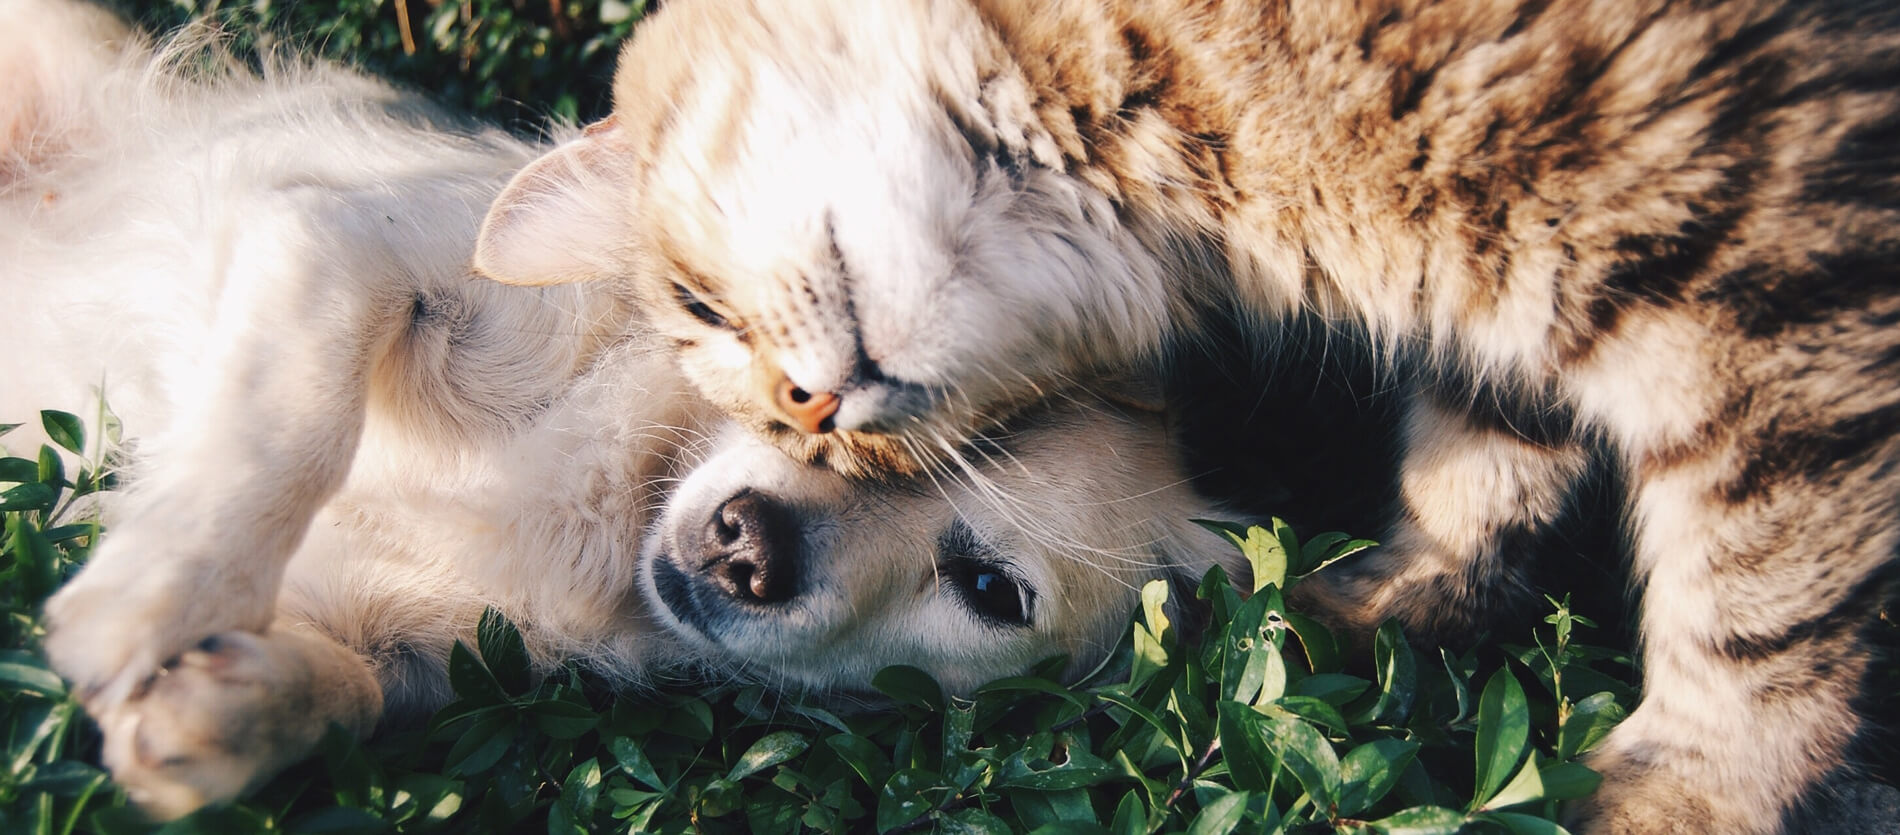 A dog and cat laying next to eachother on green vegetation